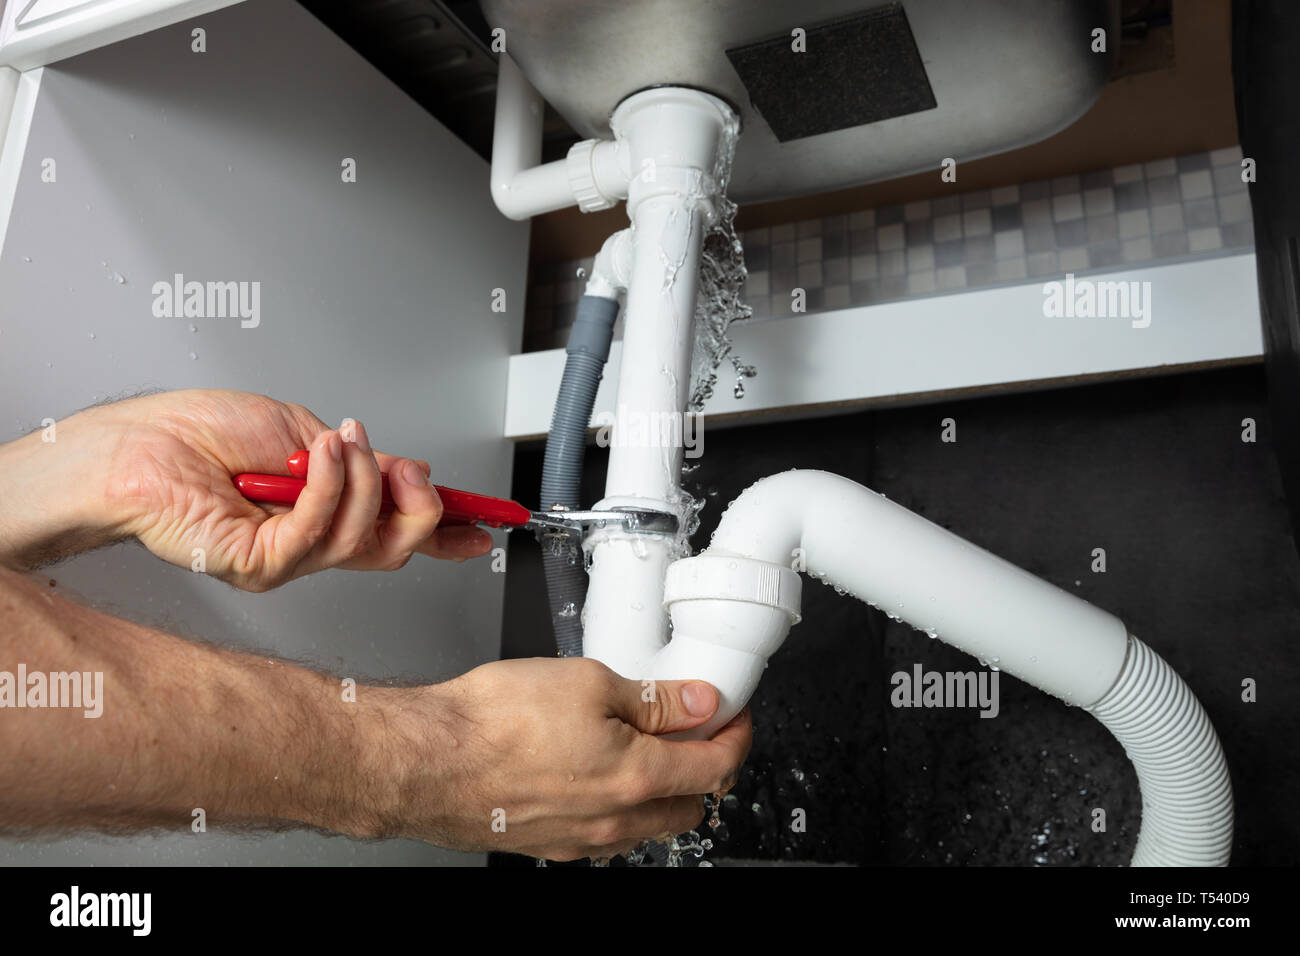 https://c8.alamy.com/comp/T540D9/close-up-of-male-plumber-fixing-white-sink-pipe-with-adjustable-wrench-T540D9.jpg